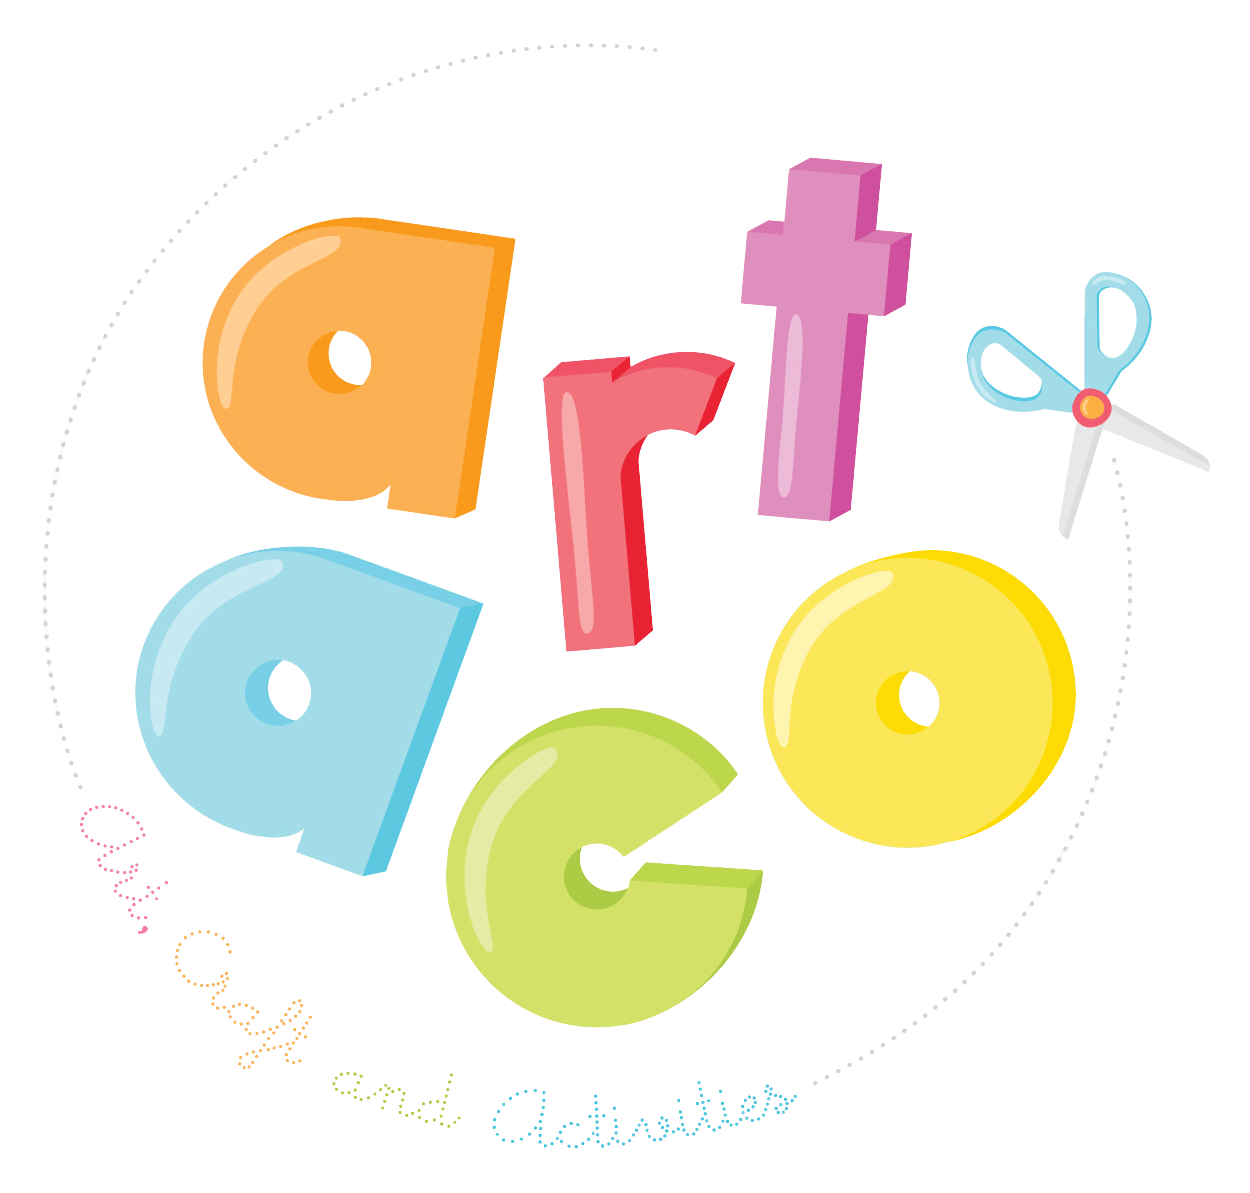 This is the colourful logo of Artaco, Bringing Fun To Children of All Ages